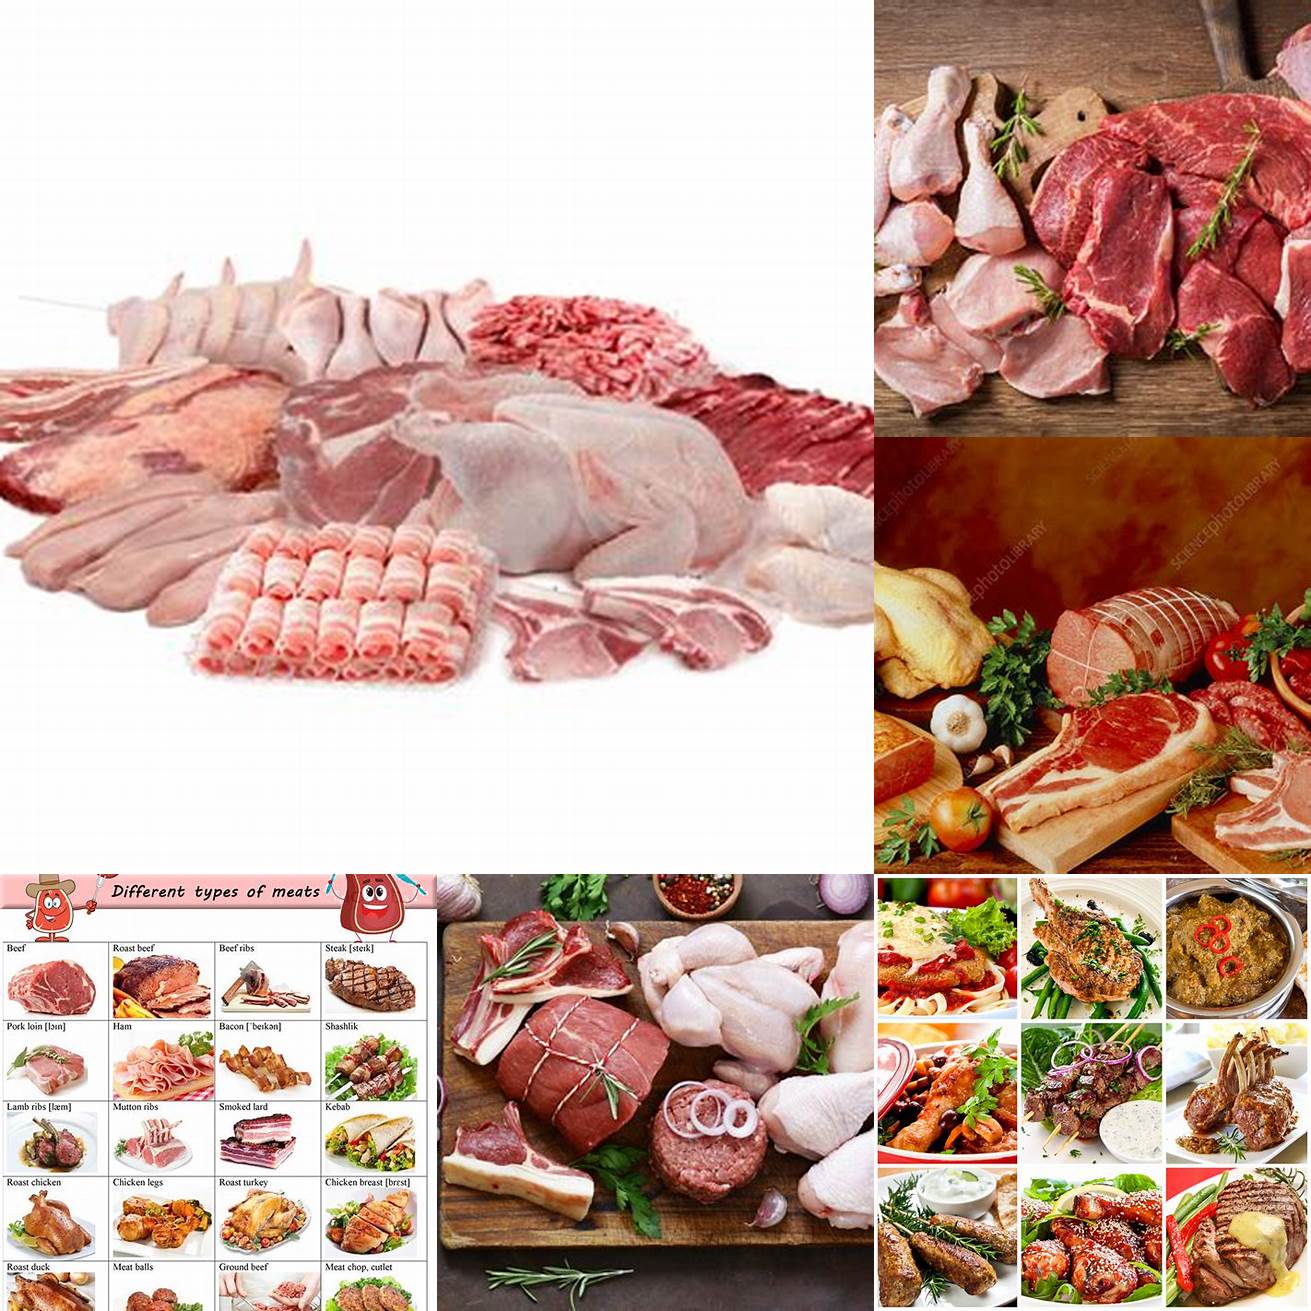 Meat Beef pork and chicken are the most commonly used meats in American cooking Meat is often grilled roasted or fried